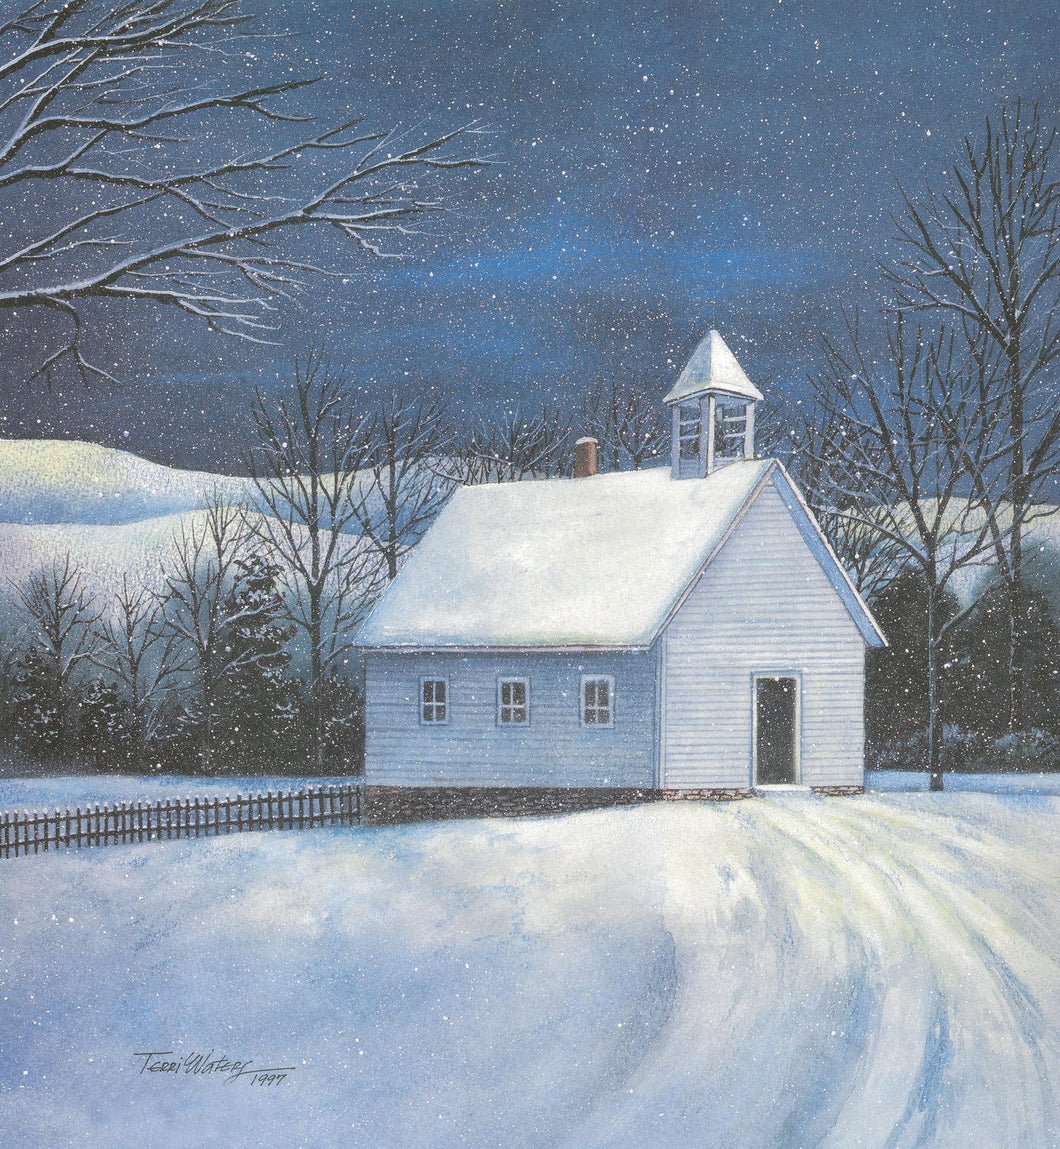 A church in snow depicted in watercolor against a deep blue, snowy night sky. 